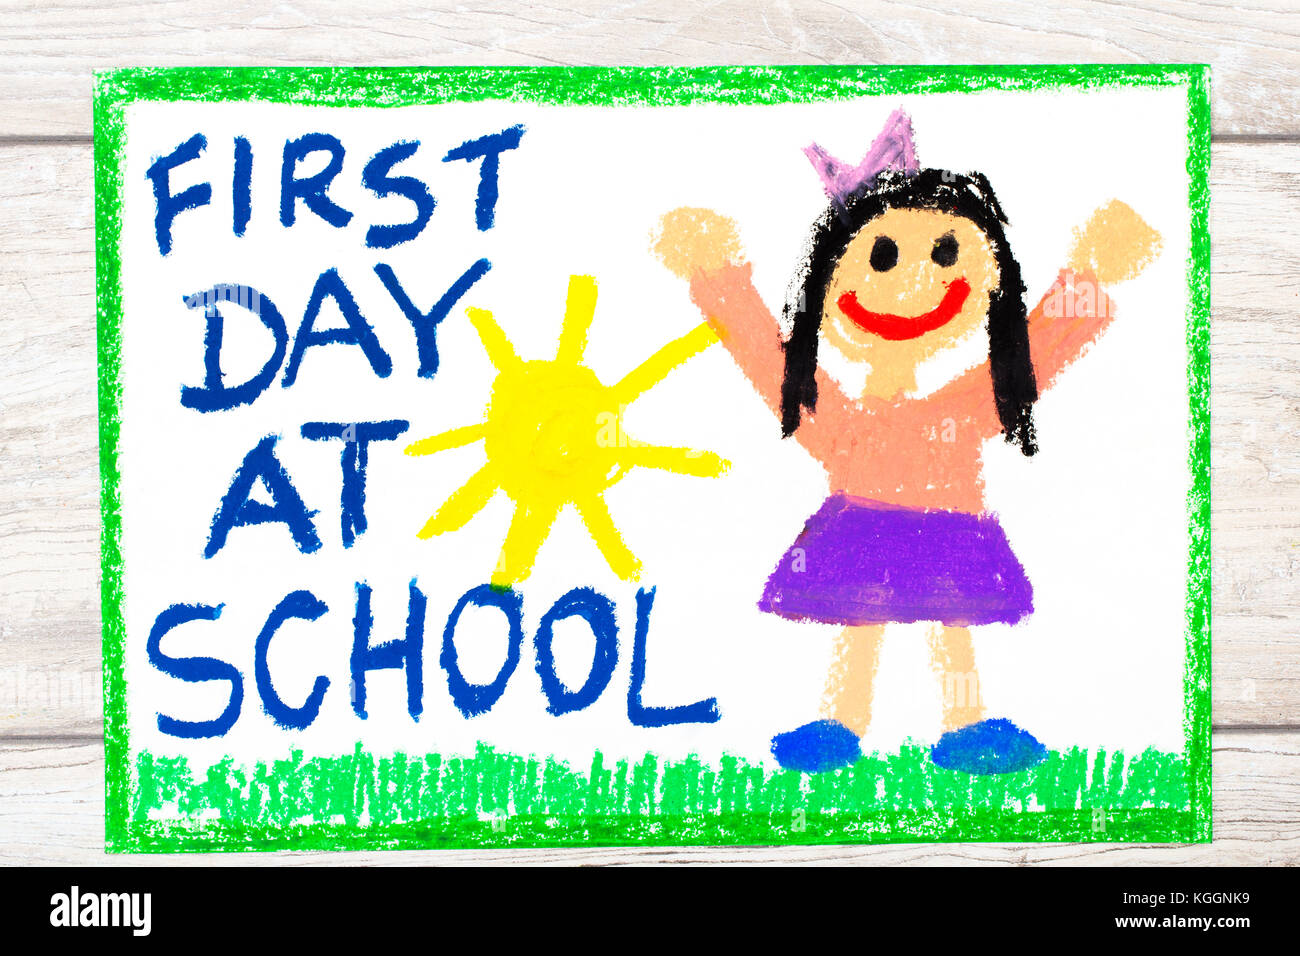 Photo Of Colorful Drawing Words First Day At School And Happy Stock Photo Alamy